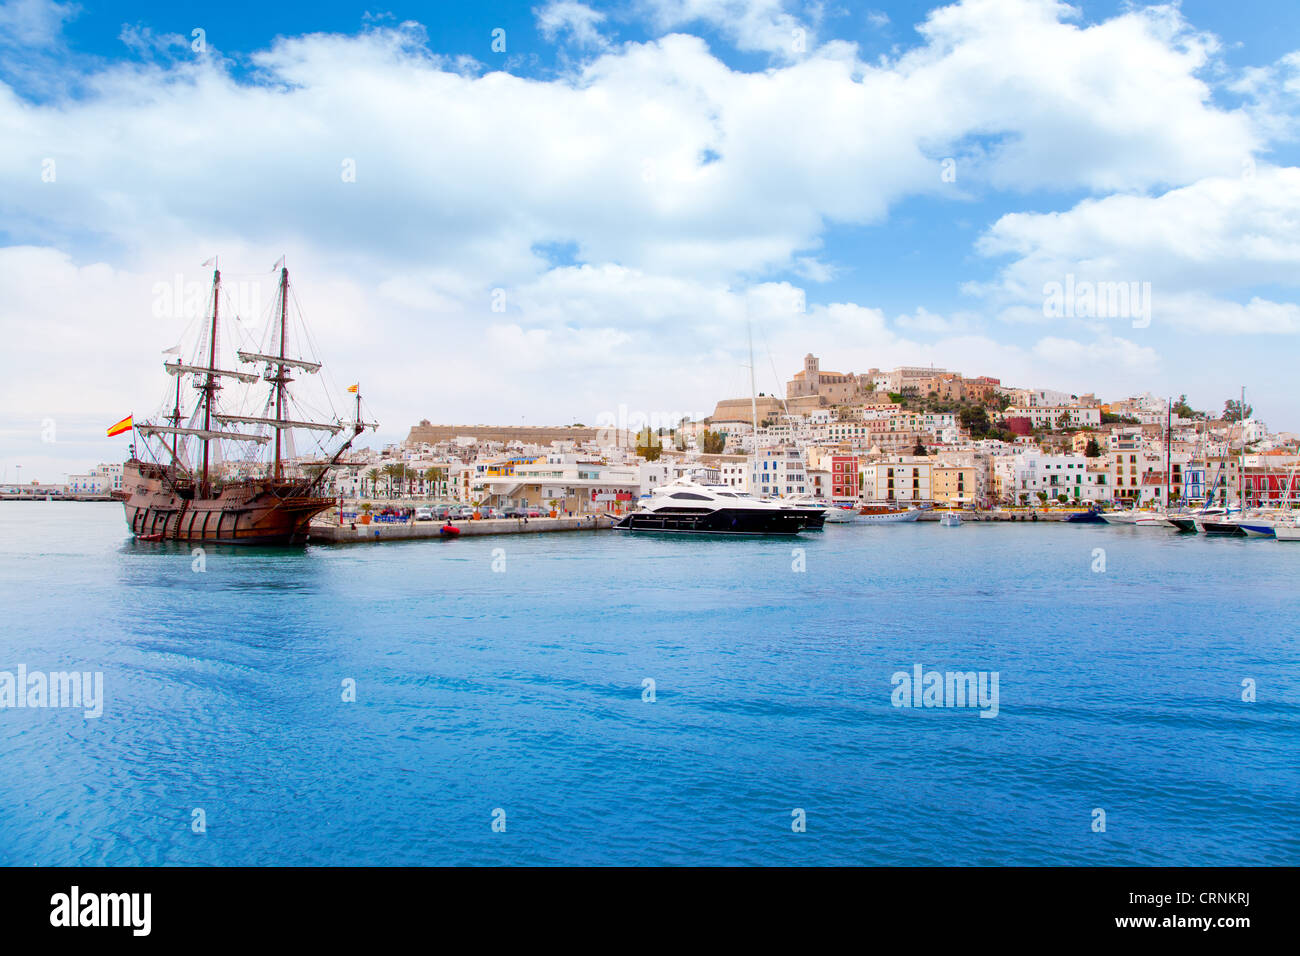 Eivissa ibiza town with old classic wooden corsair boat Stock Photo